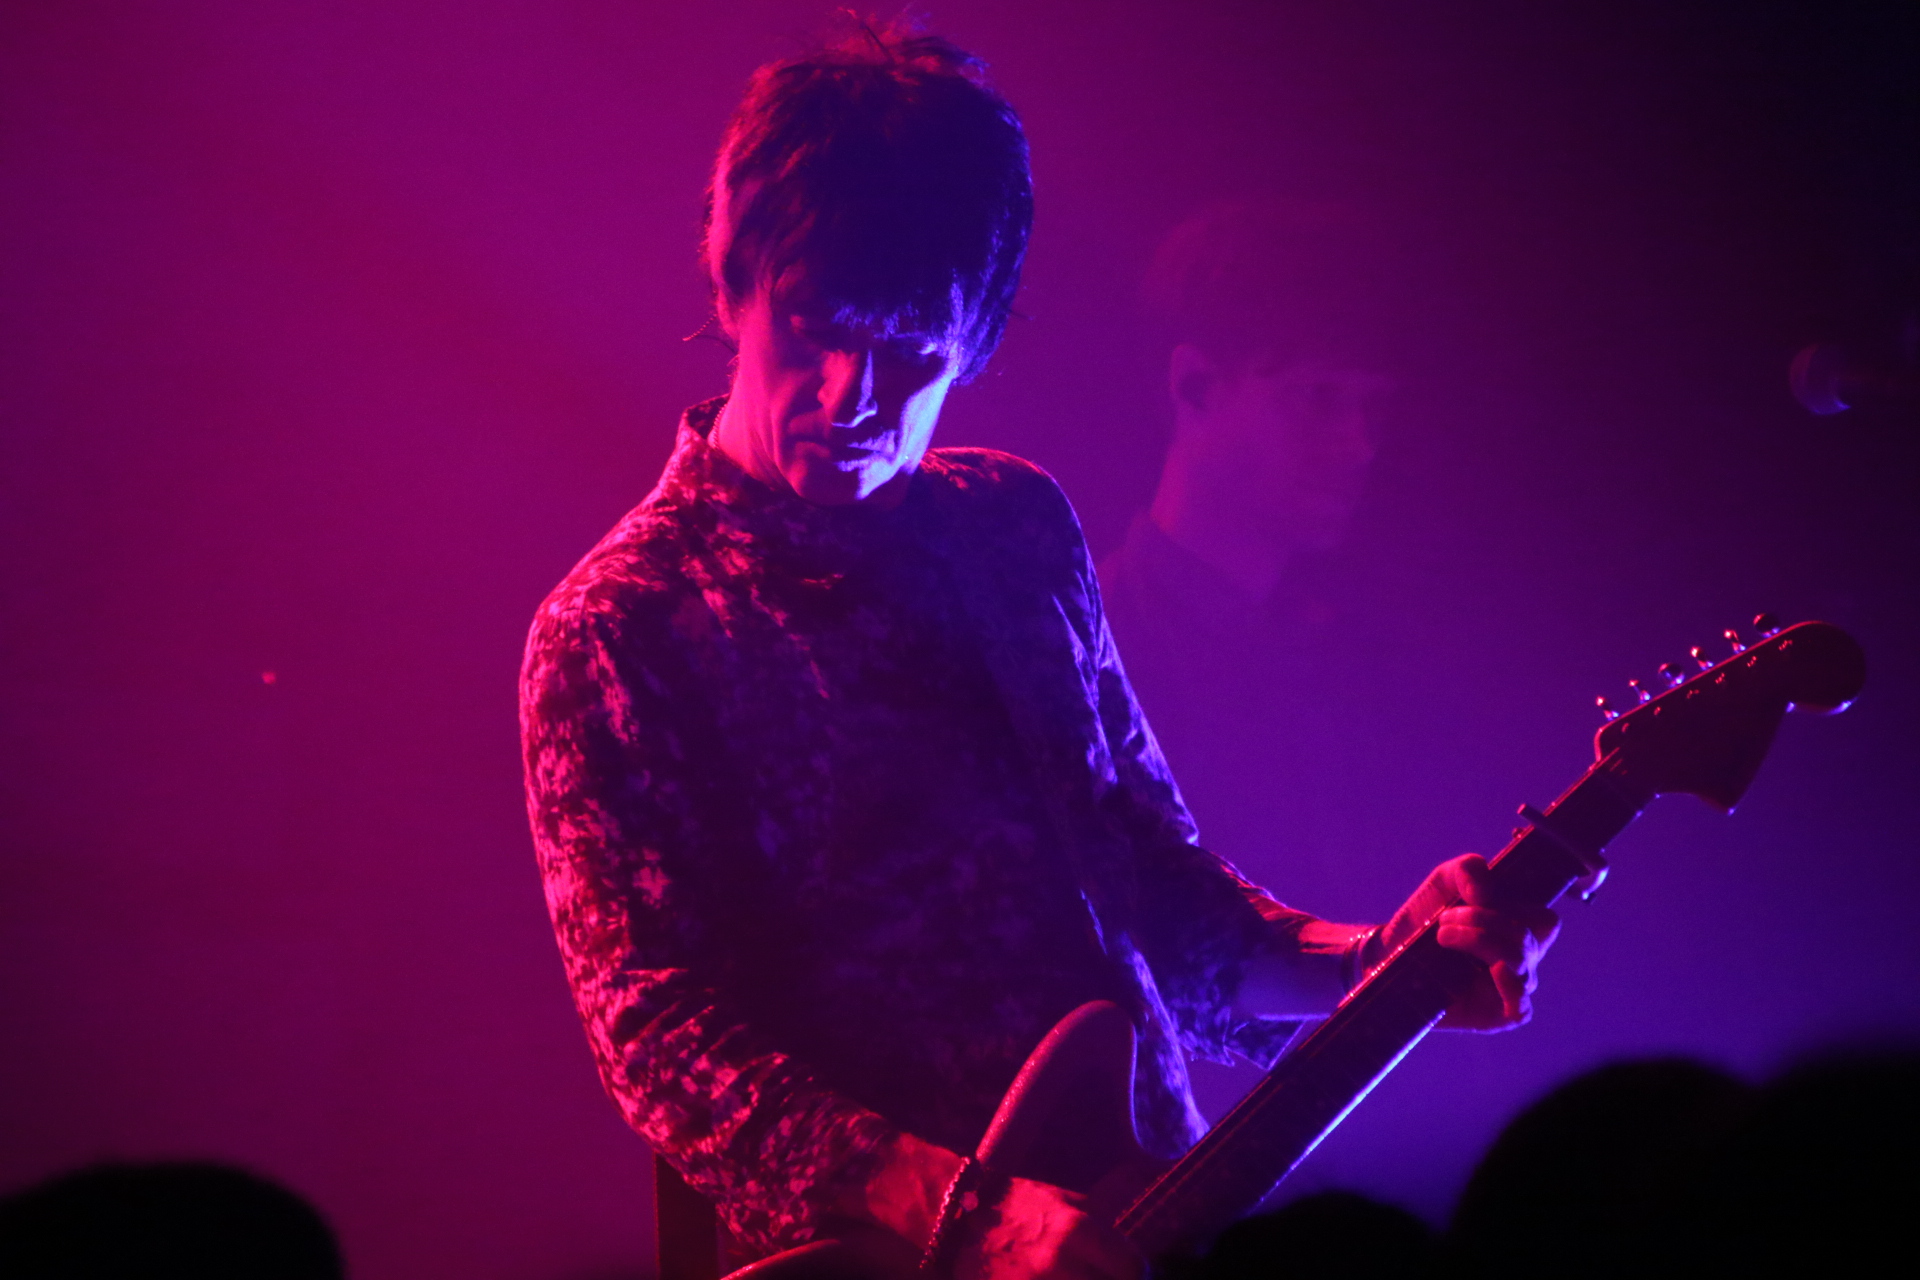 Johnny Marr lead guitarist of The Smiths